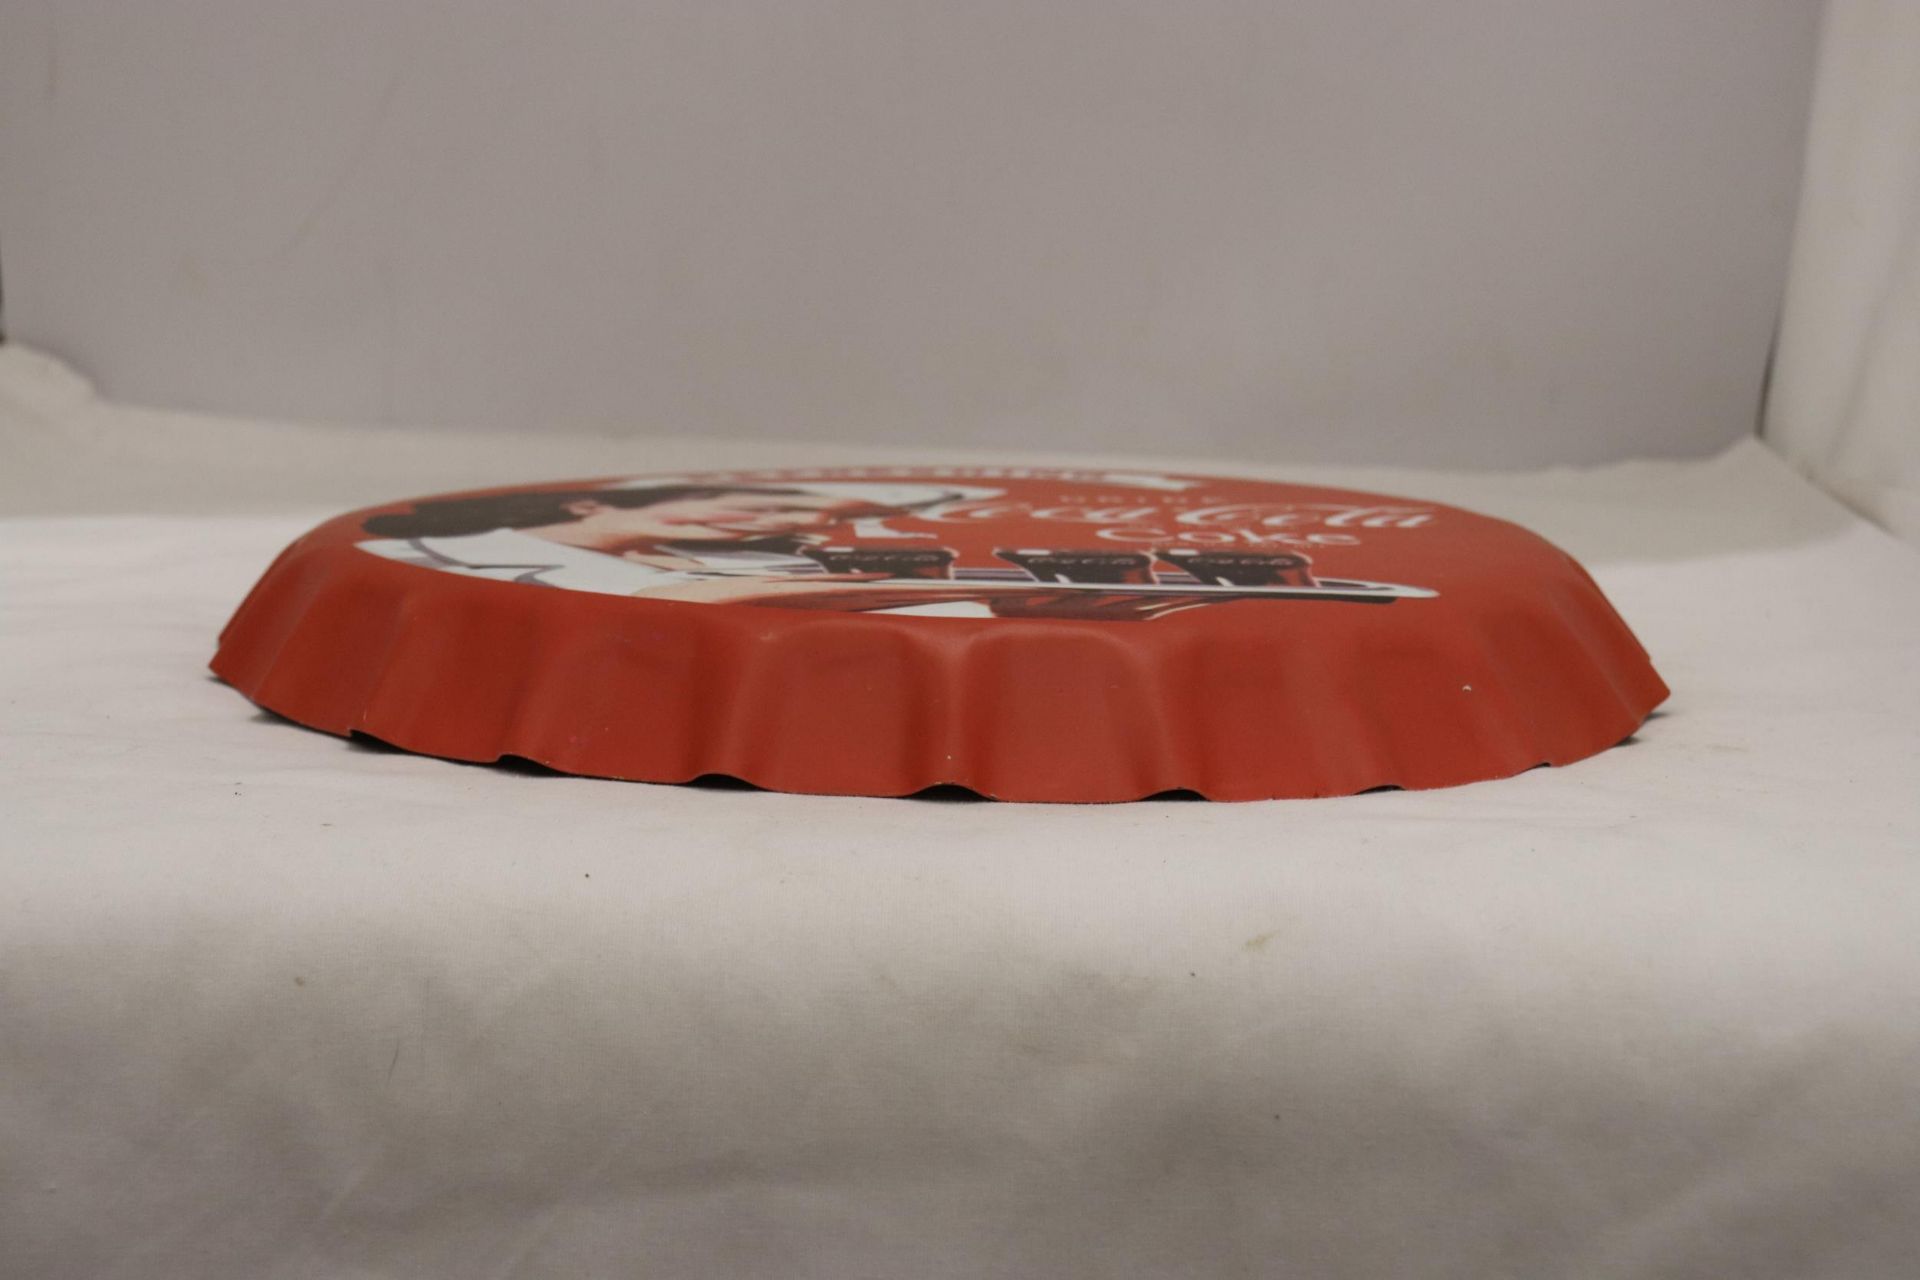 A LARGE COCA-COLA METAL BOTTLE TOP ADVERTISING PLAQUE - Image 2 of 4